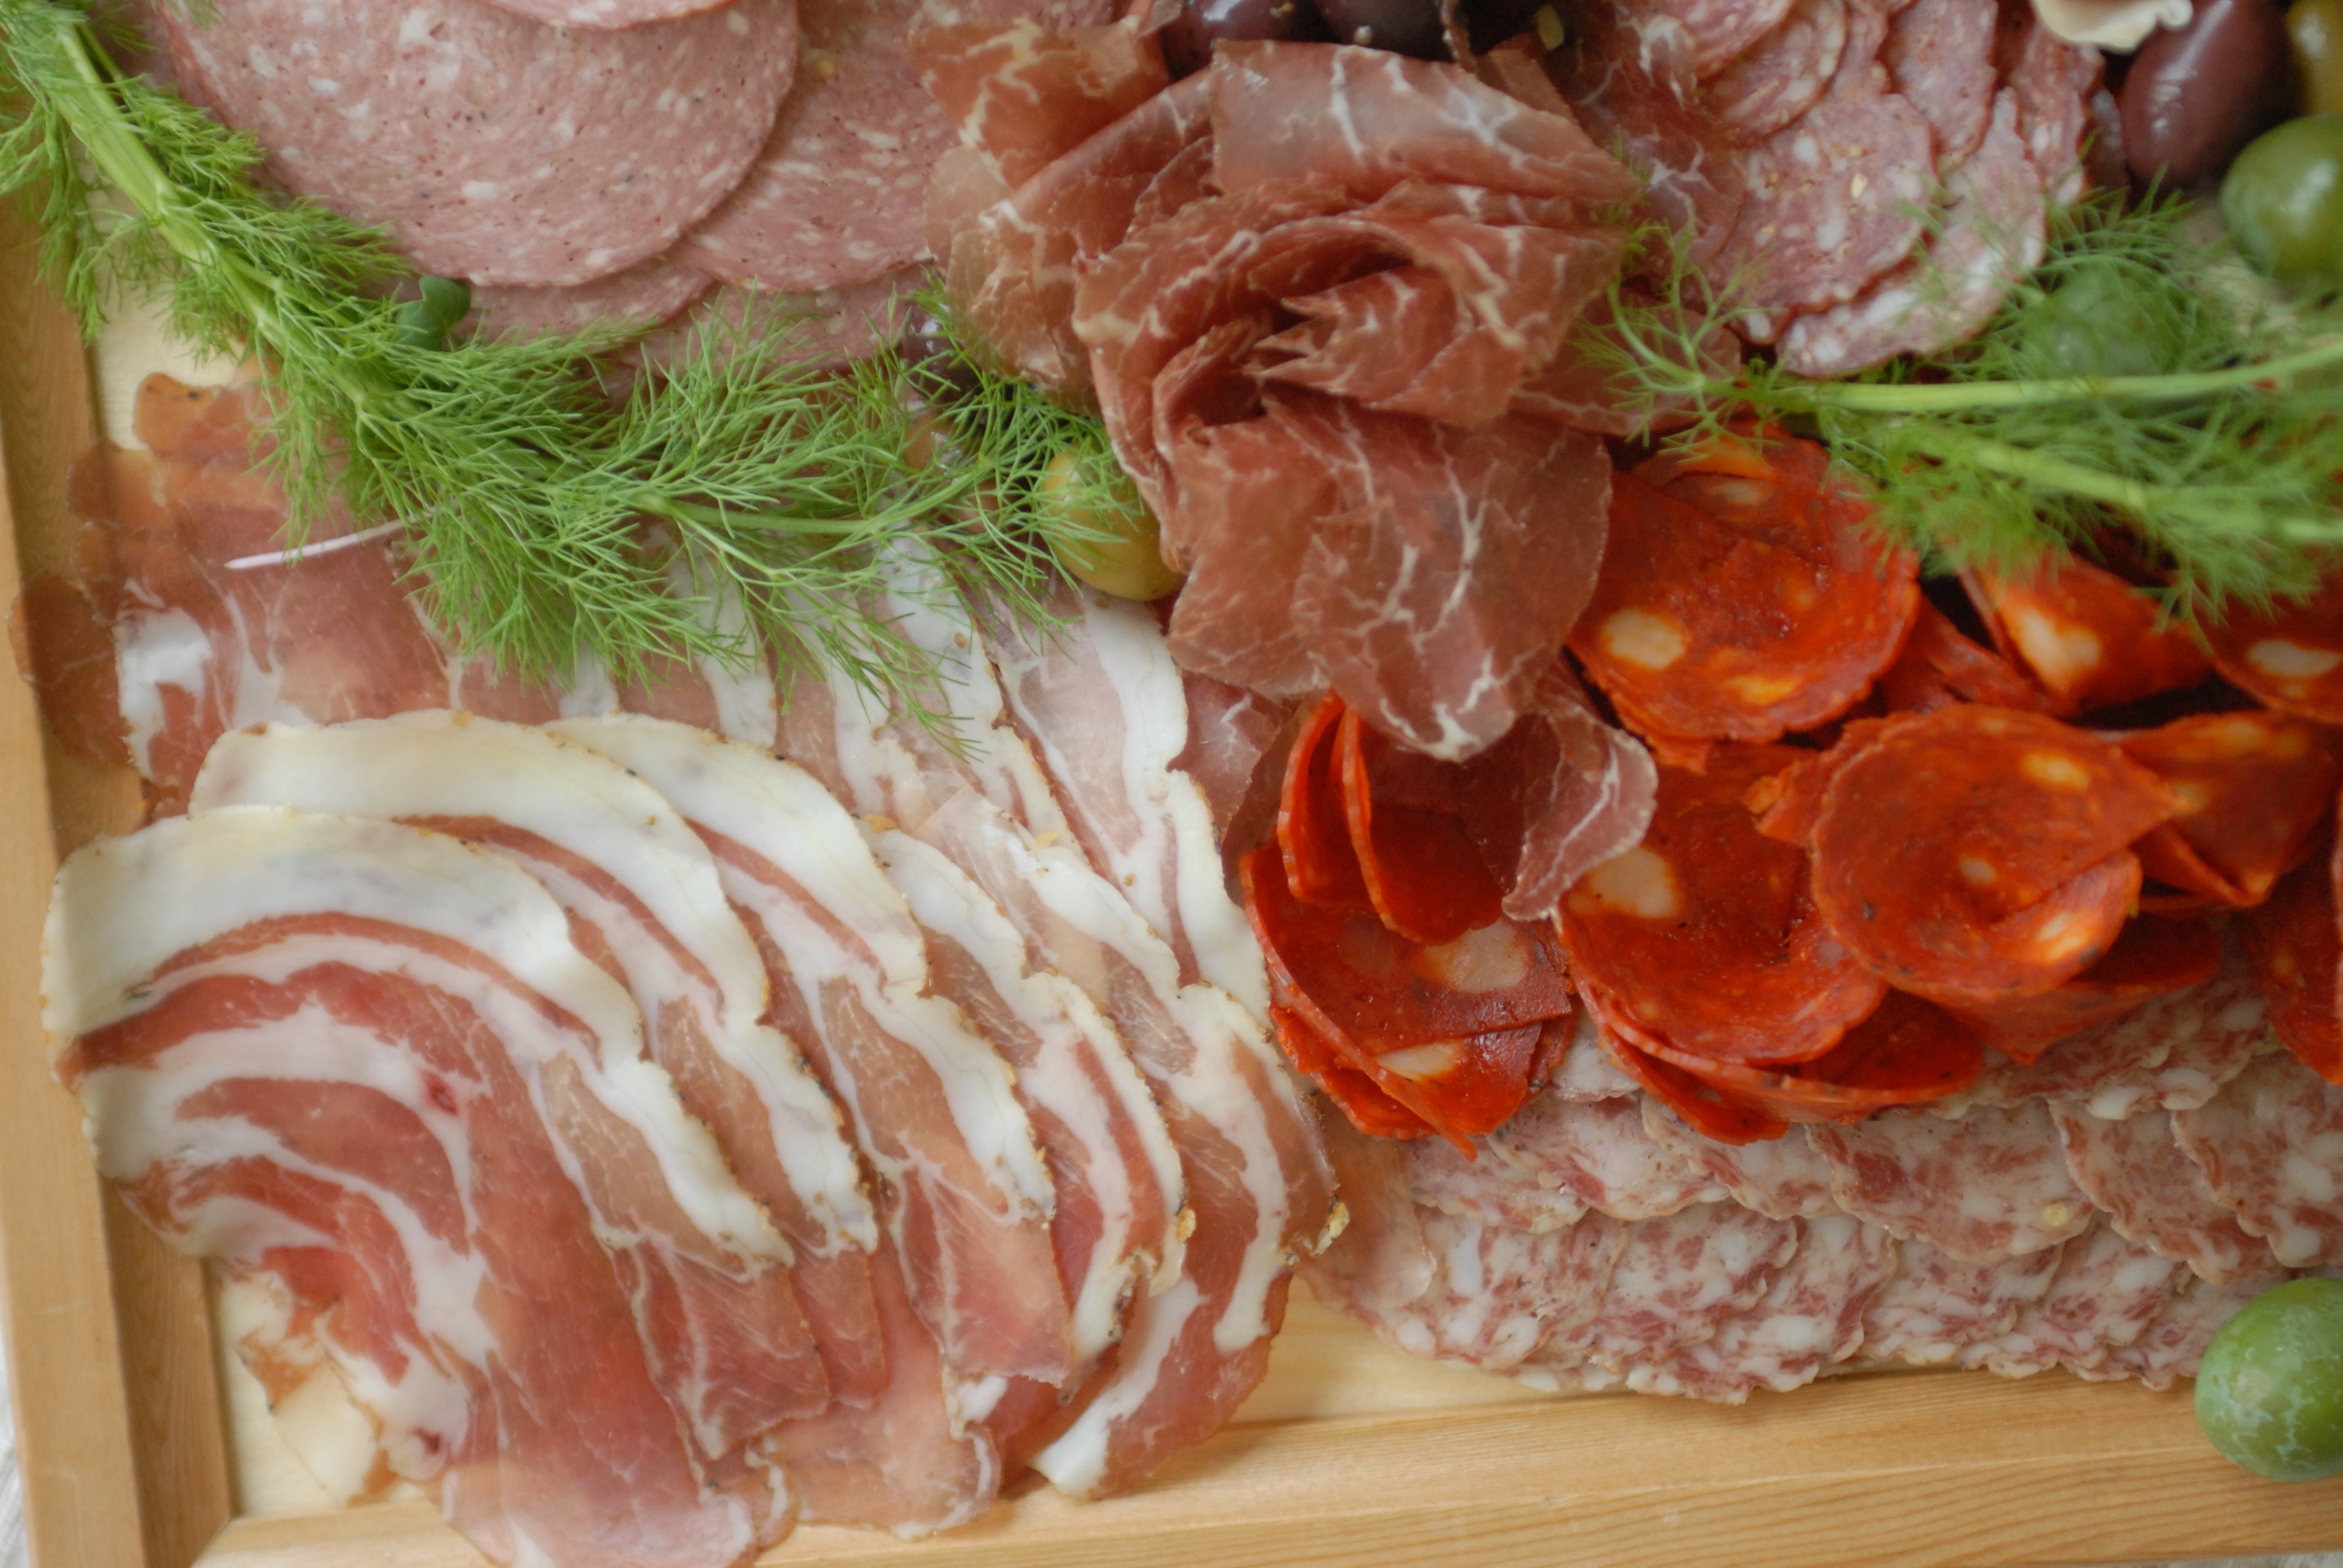 Sliced Meat + Charcuterie